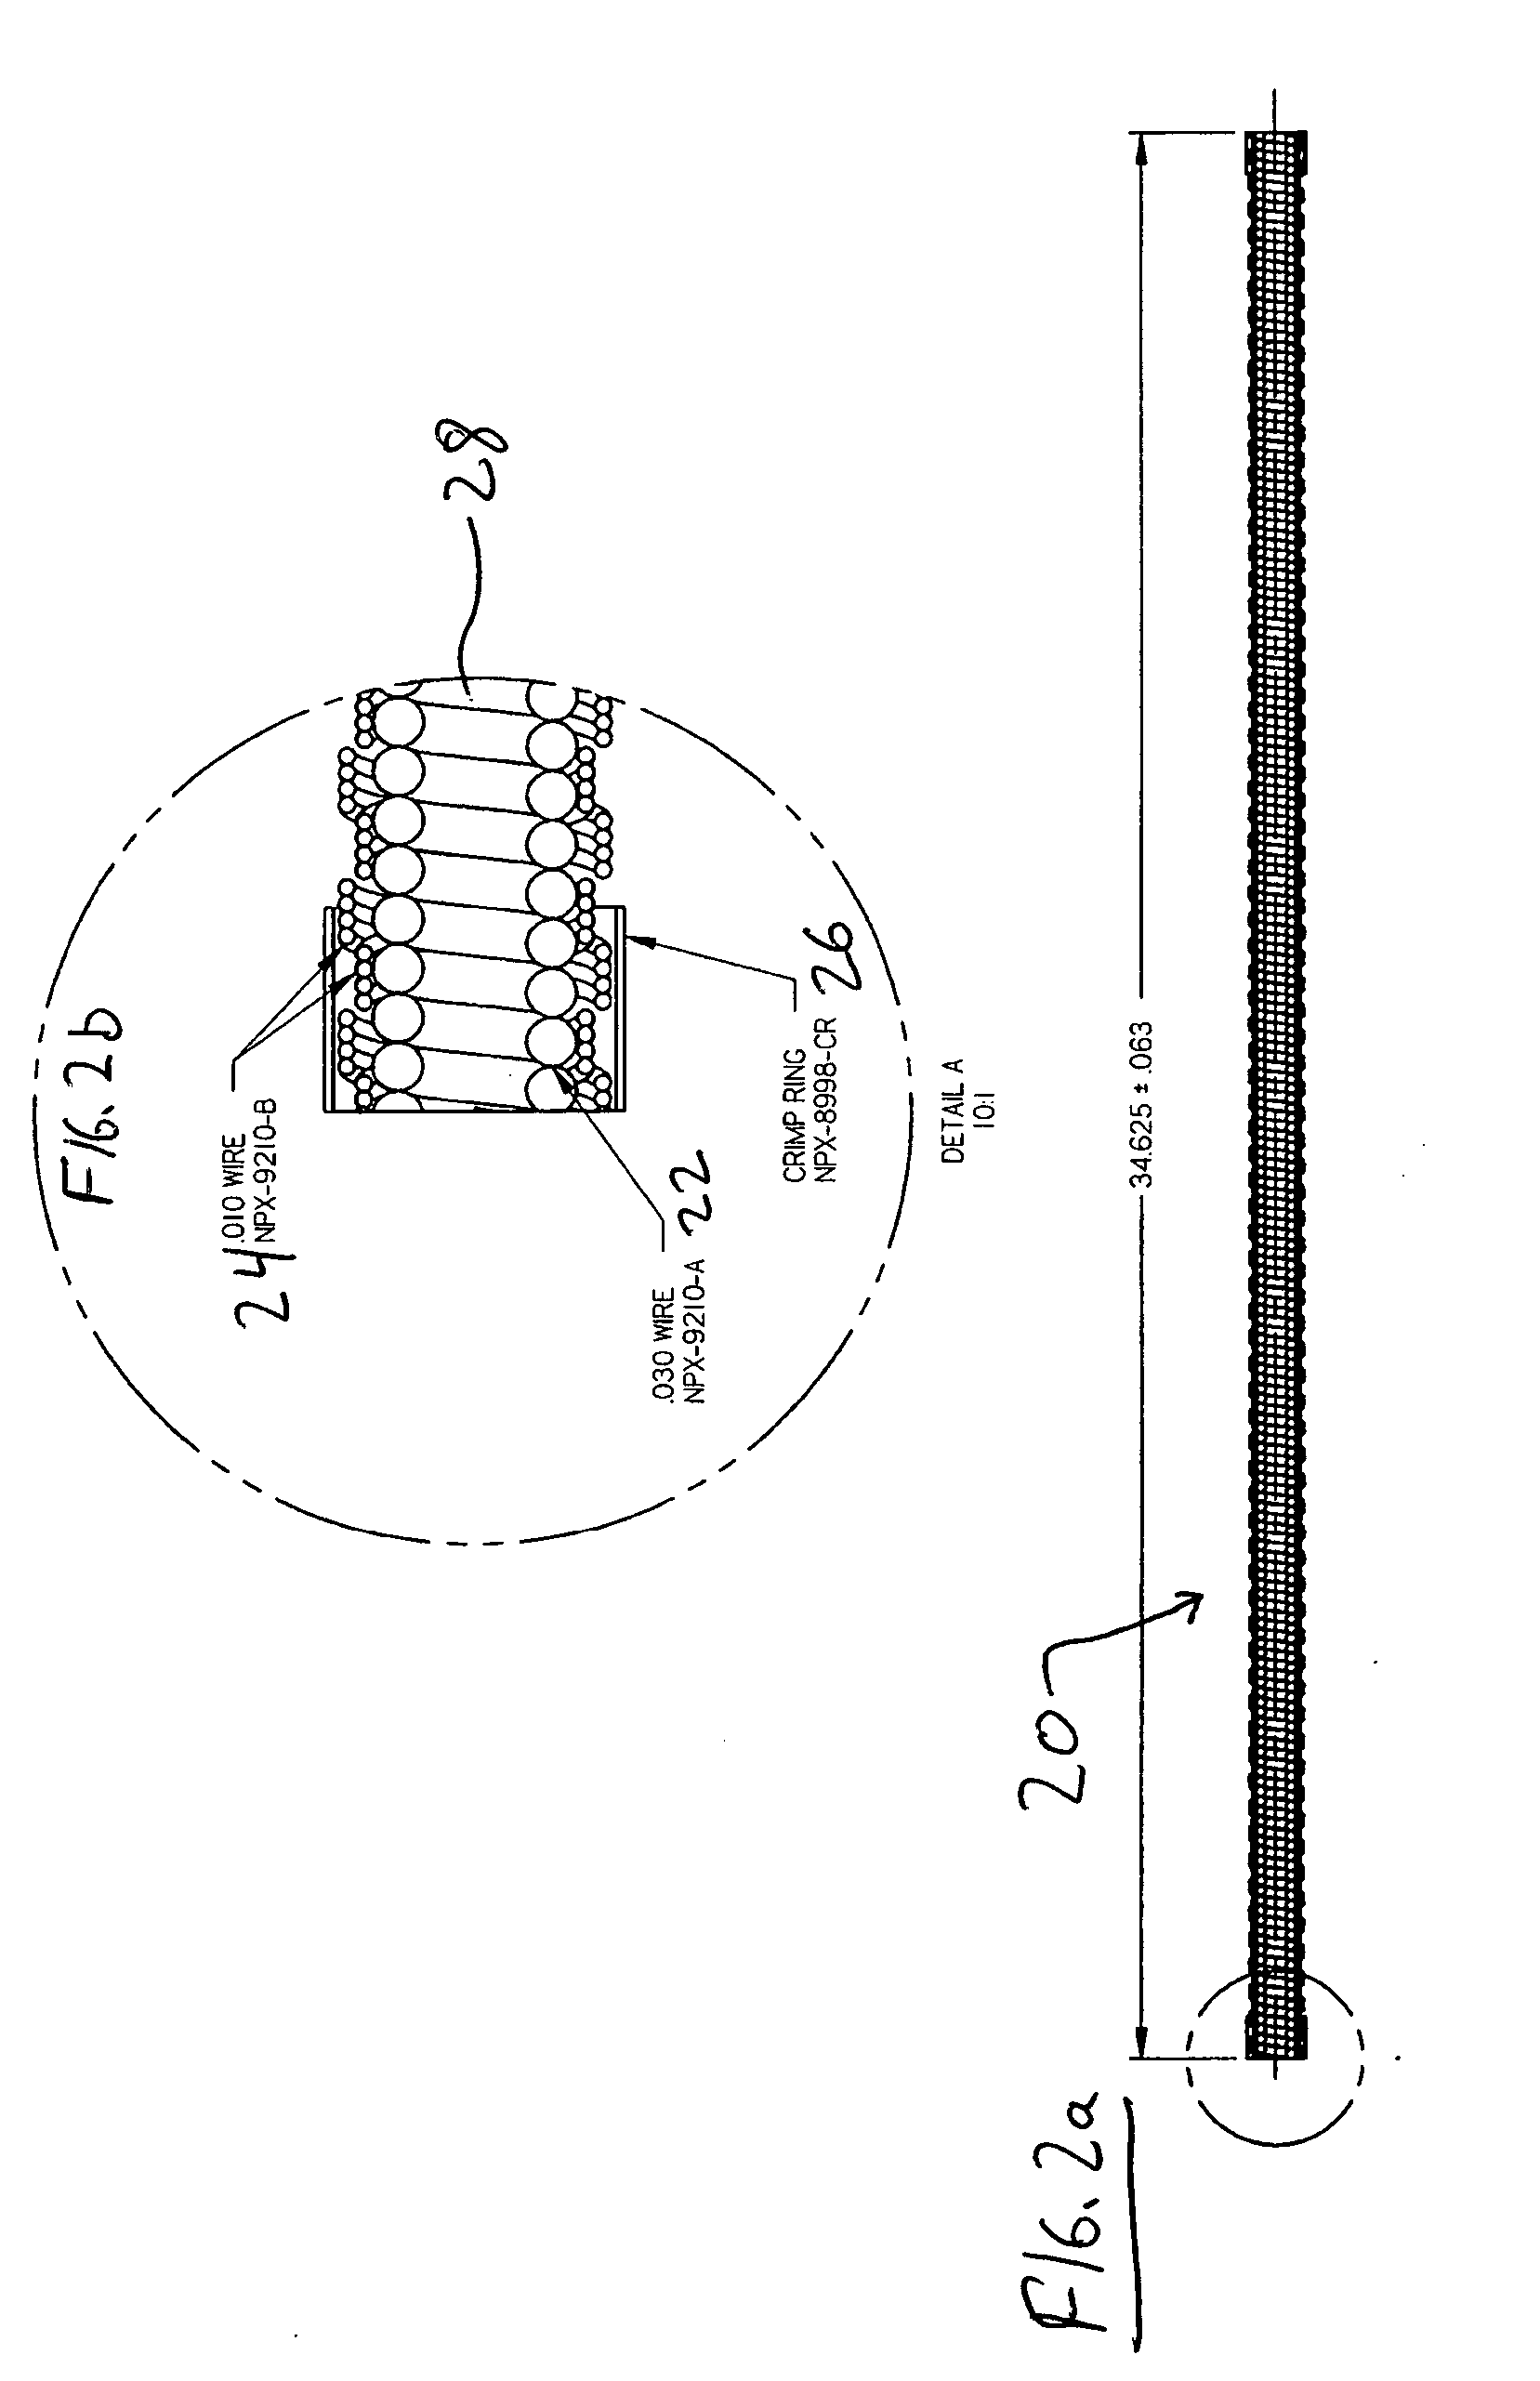 Intracorporeal probe with disposable probe body